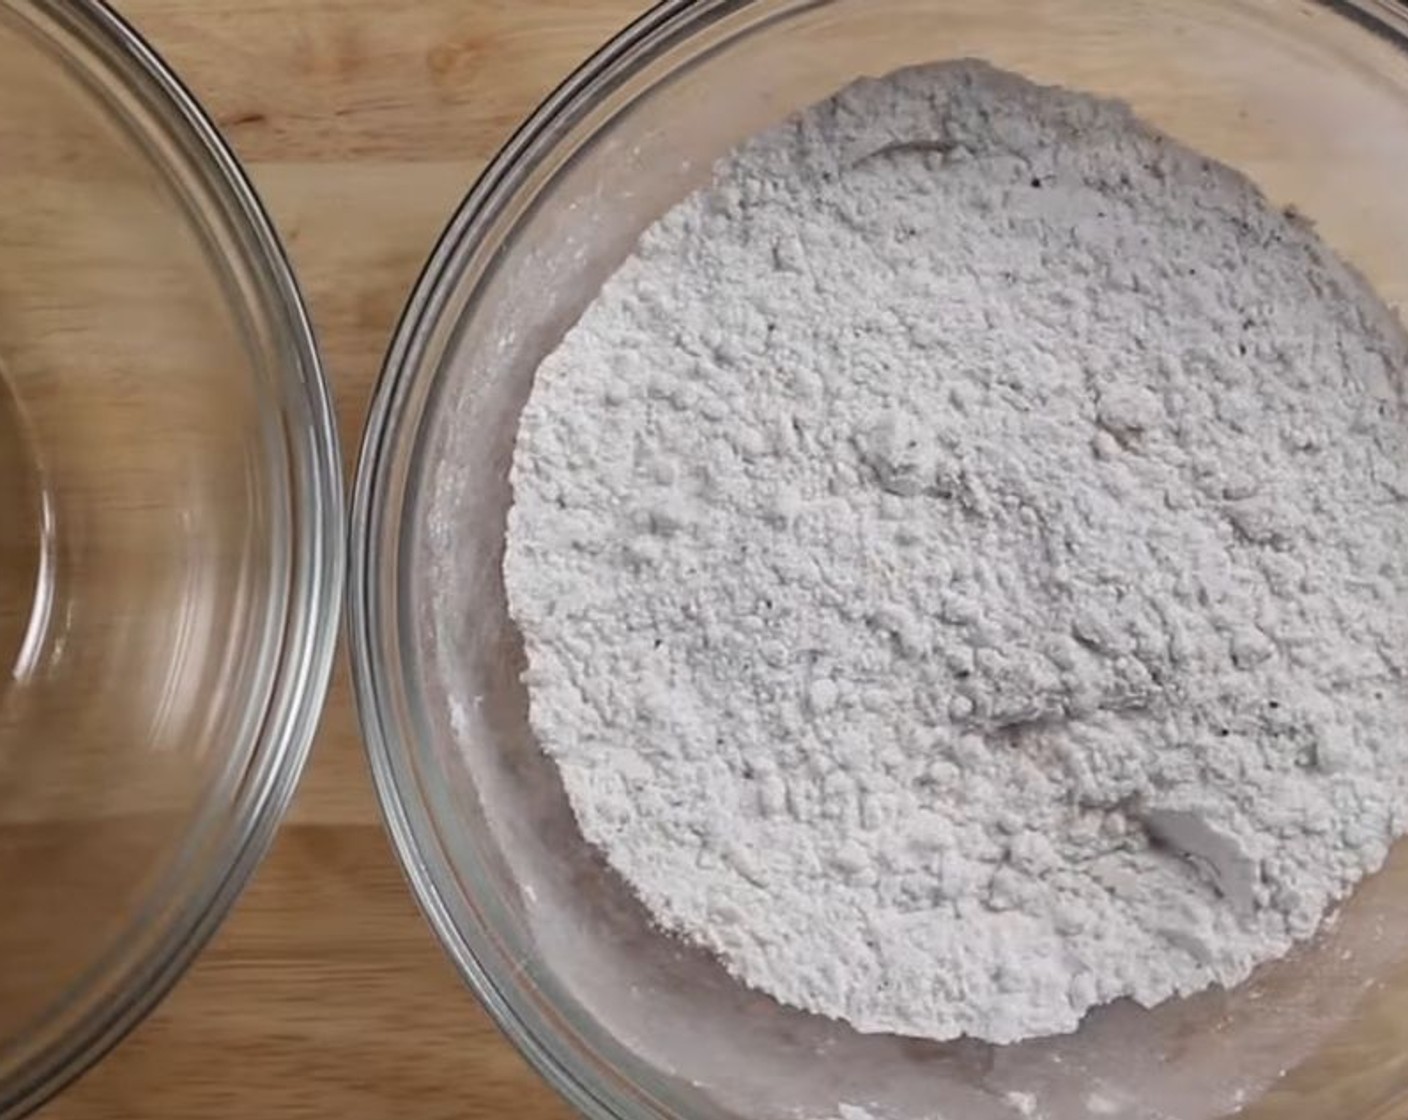 step 3 For the breading, add All-Purpose Flour (1/2 cup), Salt (1 tsp), Ground Black Pepper (1 tsp), Onion Powder (1 tsp) and Powdered Confectioners Sugar (1 tsp) into a bowl. Mix well and set aside.